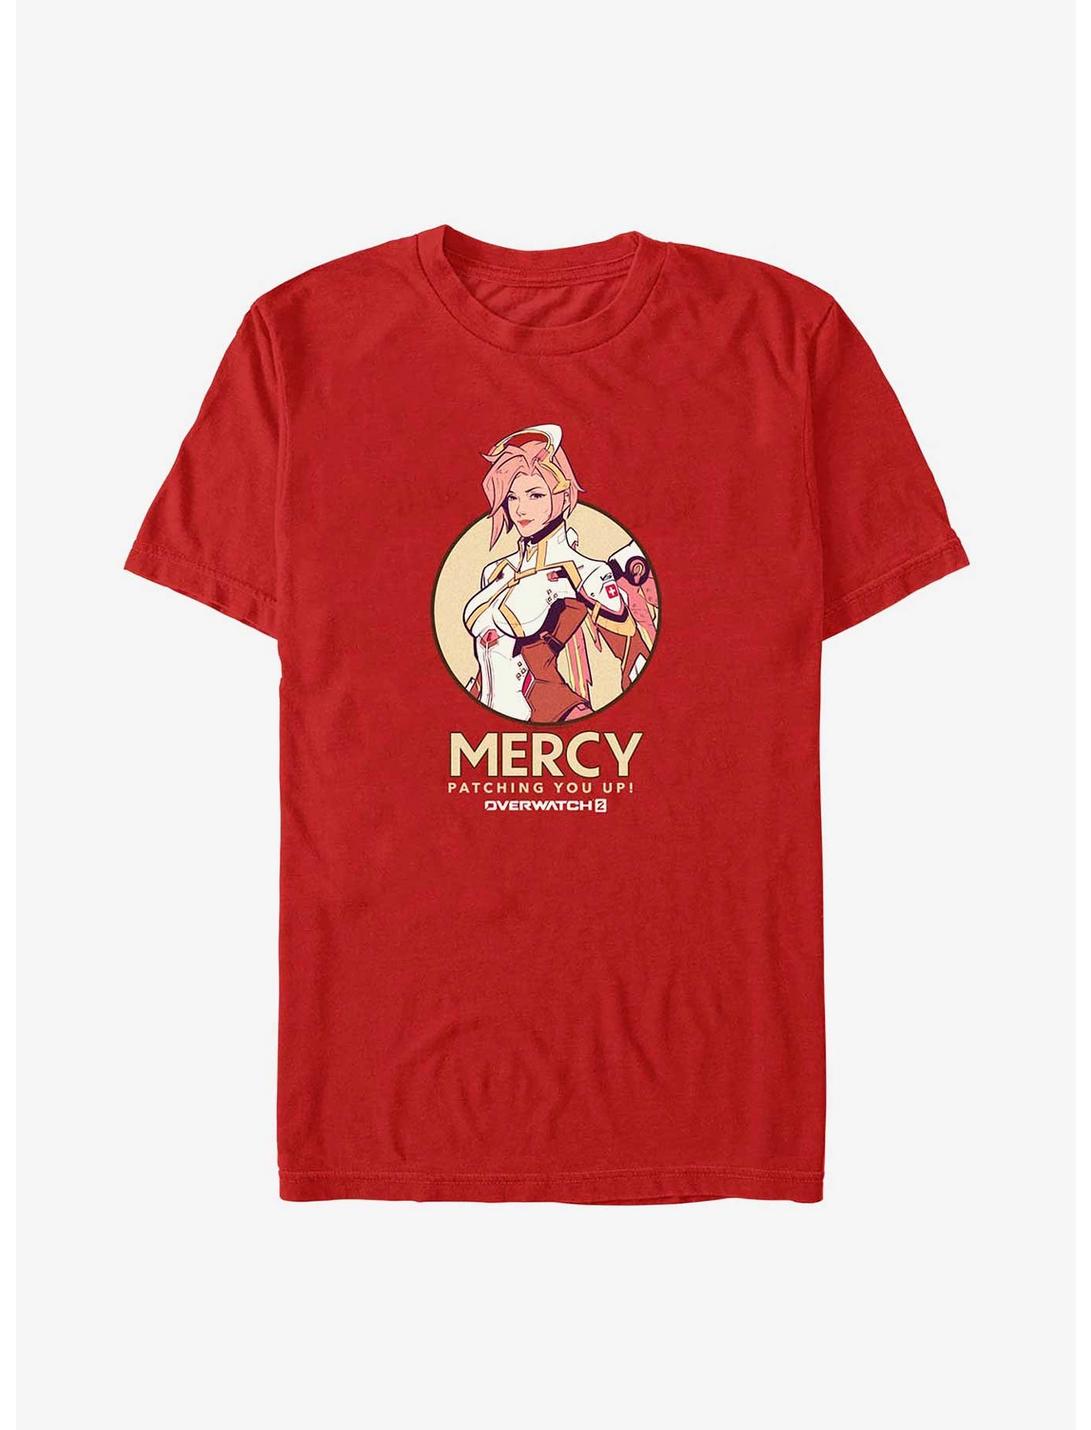 Overwatch 2 Mercy Patching You Up T-Shirt, RED, hi-res